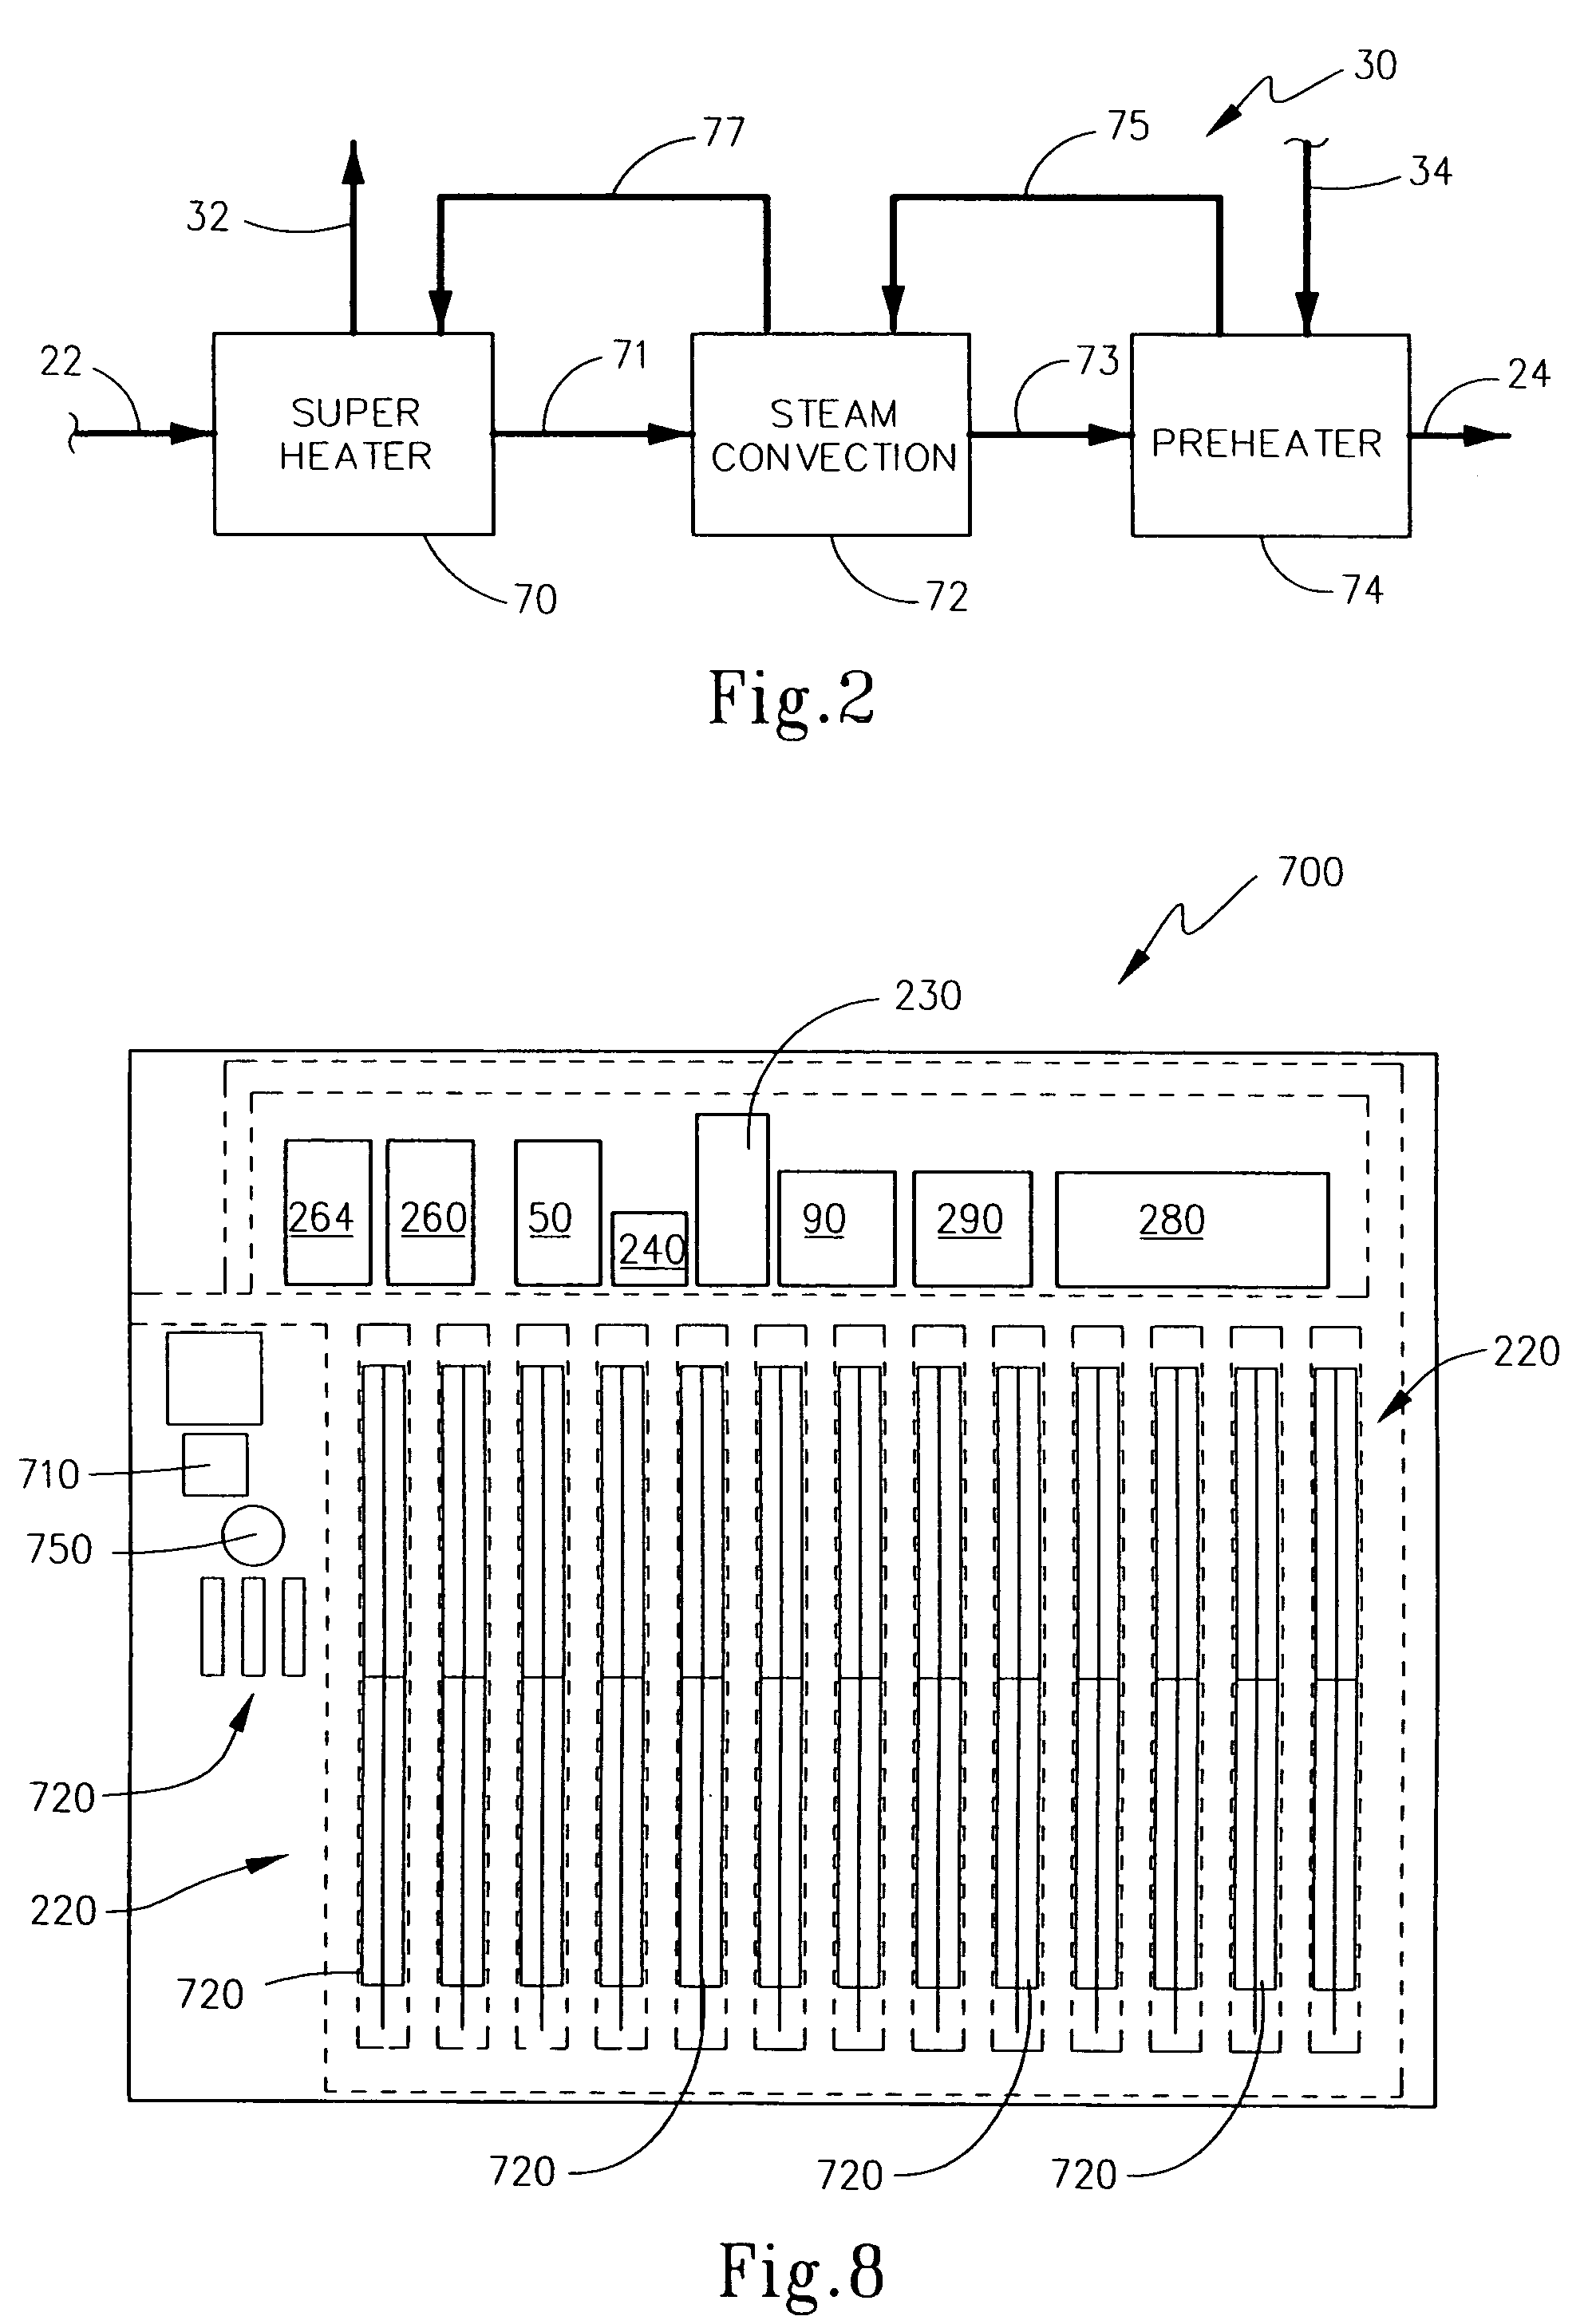 Electric generation facility and method employing solar technology